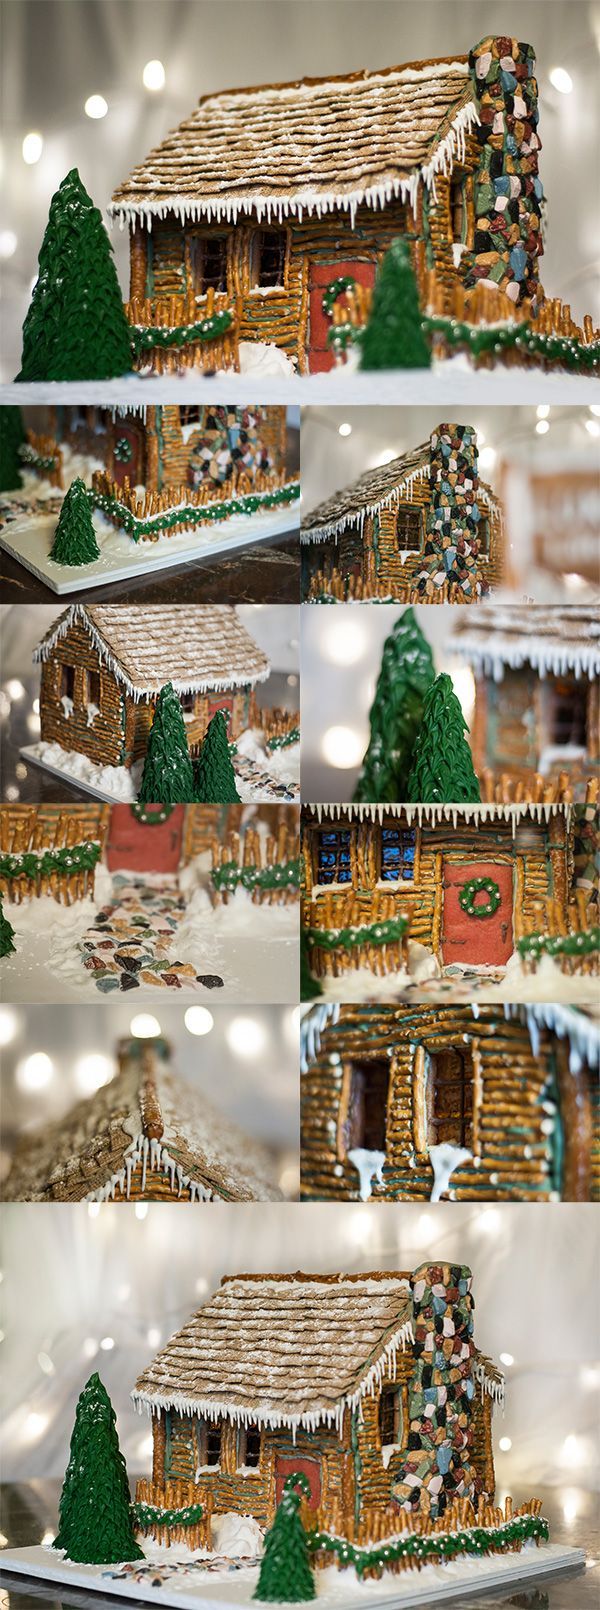 “Christmas Log Cabin” by Kaitlin L.